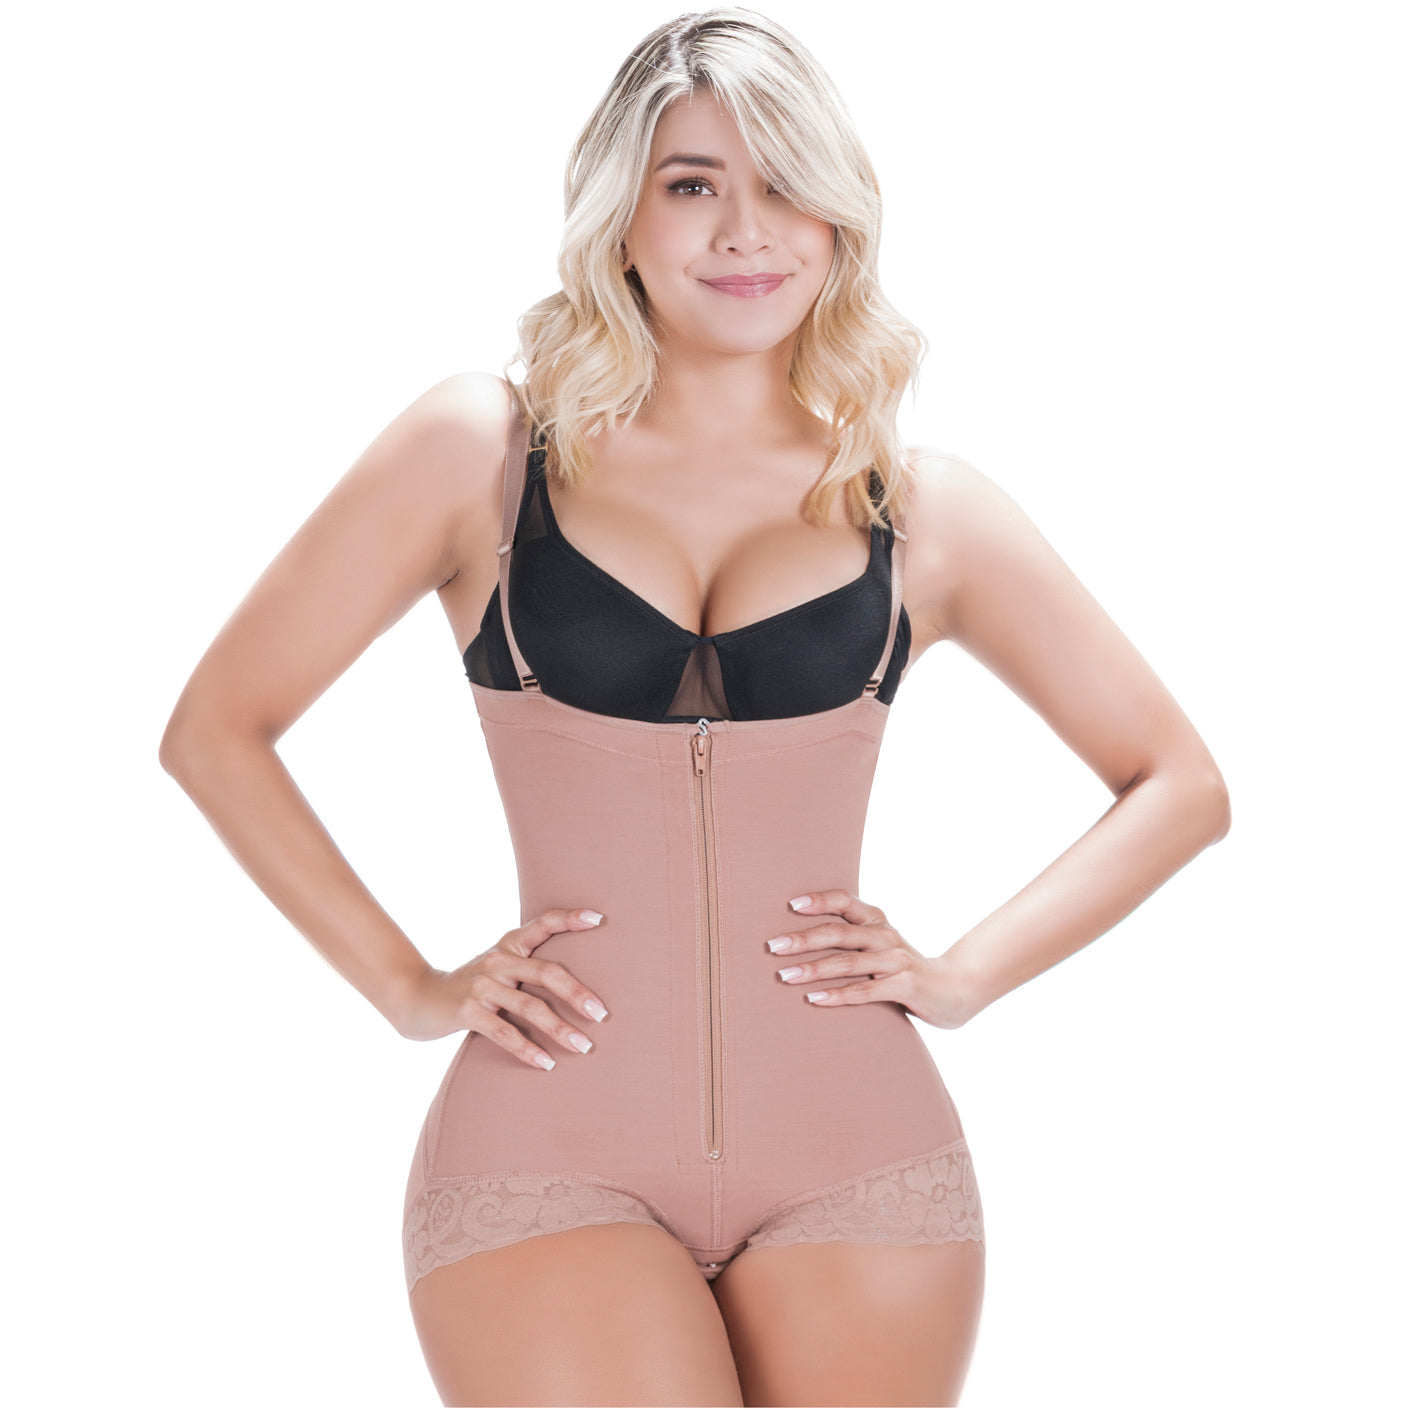 Sonryse Colombian Postpartum Shapewear | Powernet Fabric | Adjustable  Straps | Open-Bust Design | Comfy and Confidence-Boosting